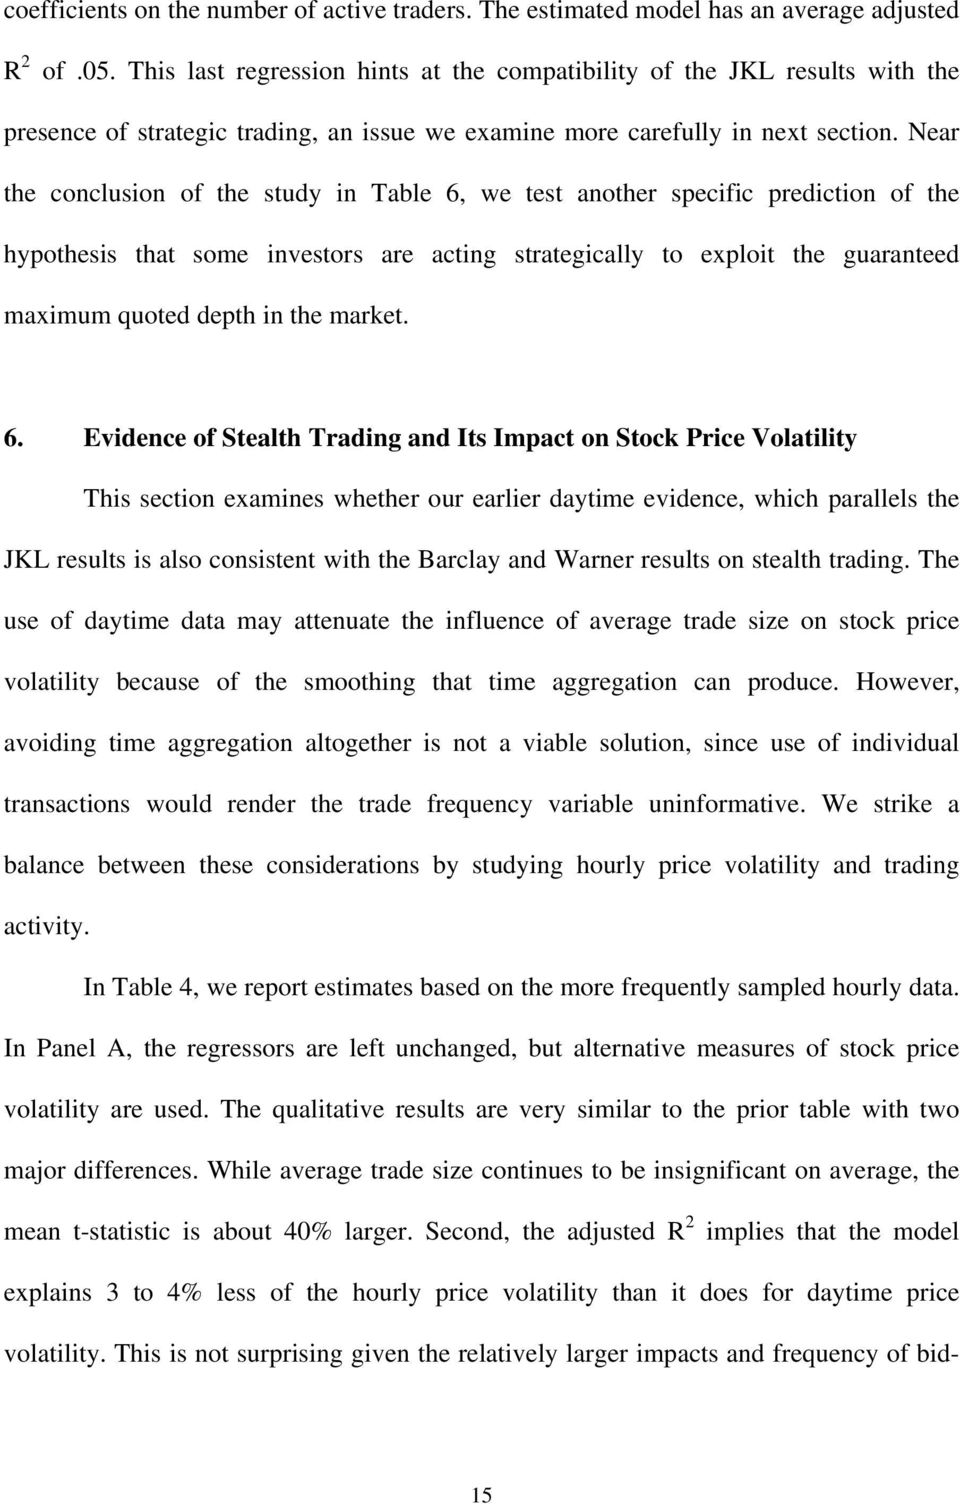 Near the conclusion of the study in Table 6, we test another specific prediction of the hypothesis that some investors are acting strategically to exploit the guaranteed maximum quoted depth in the